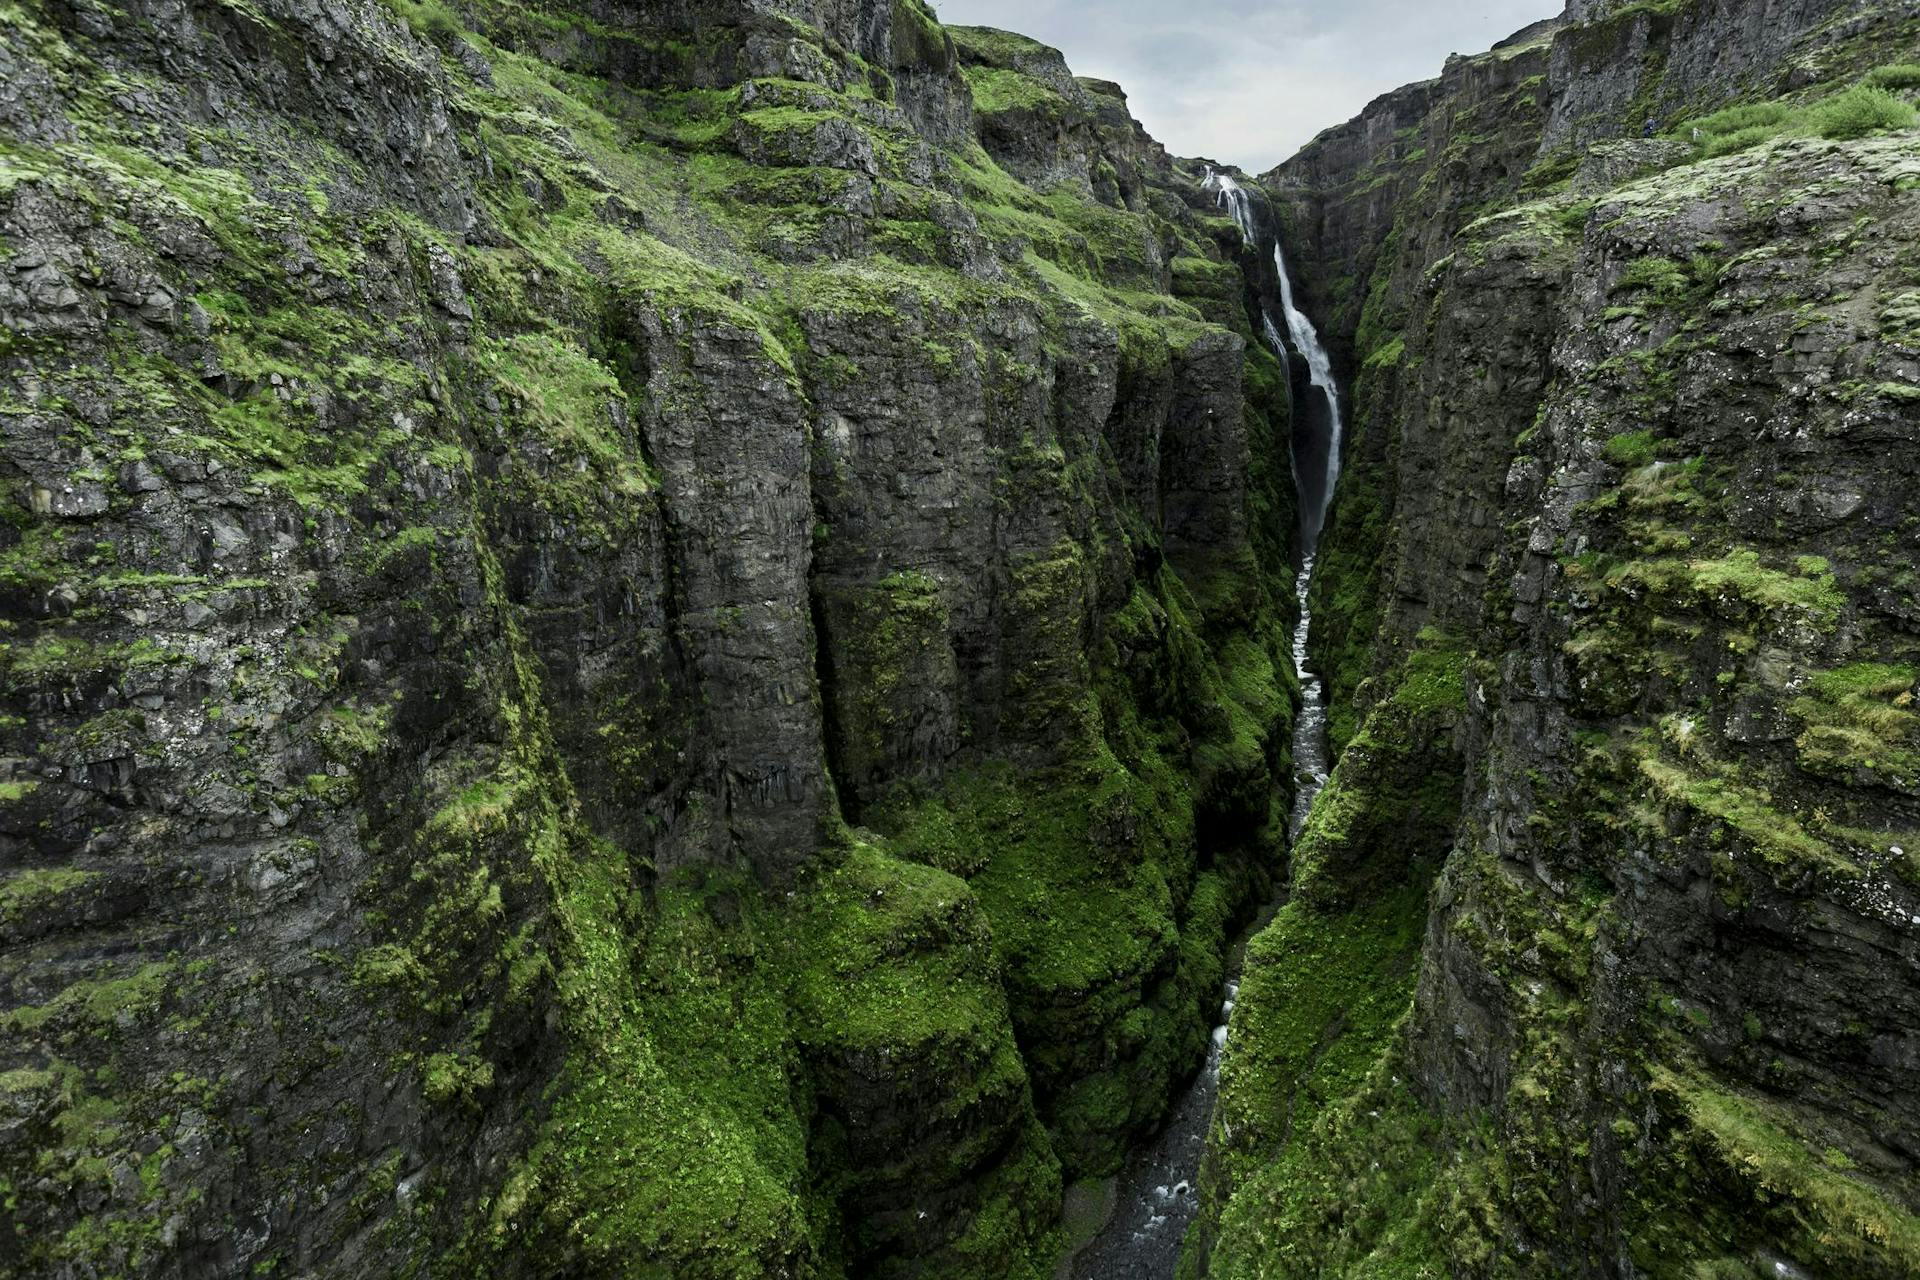 View of Glymur in Iceland